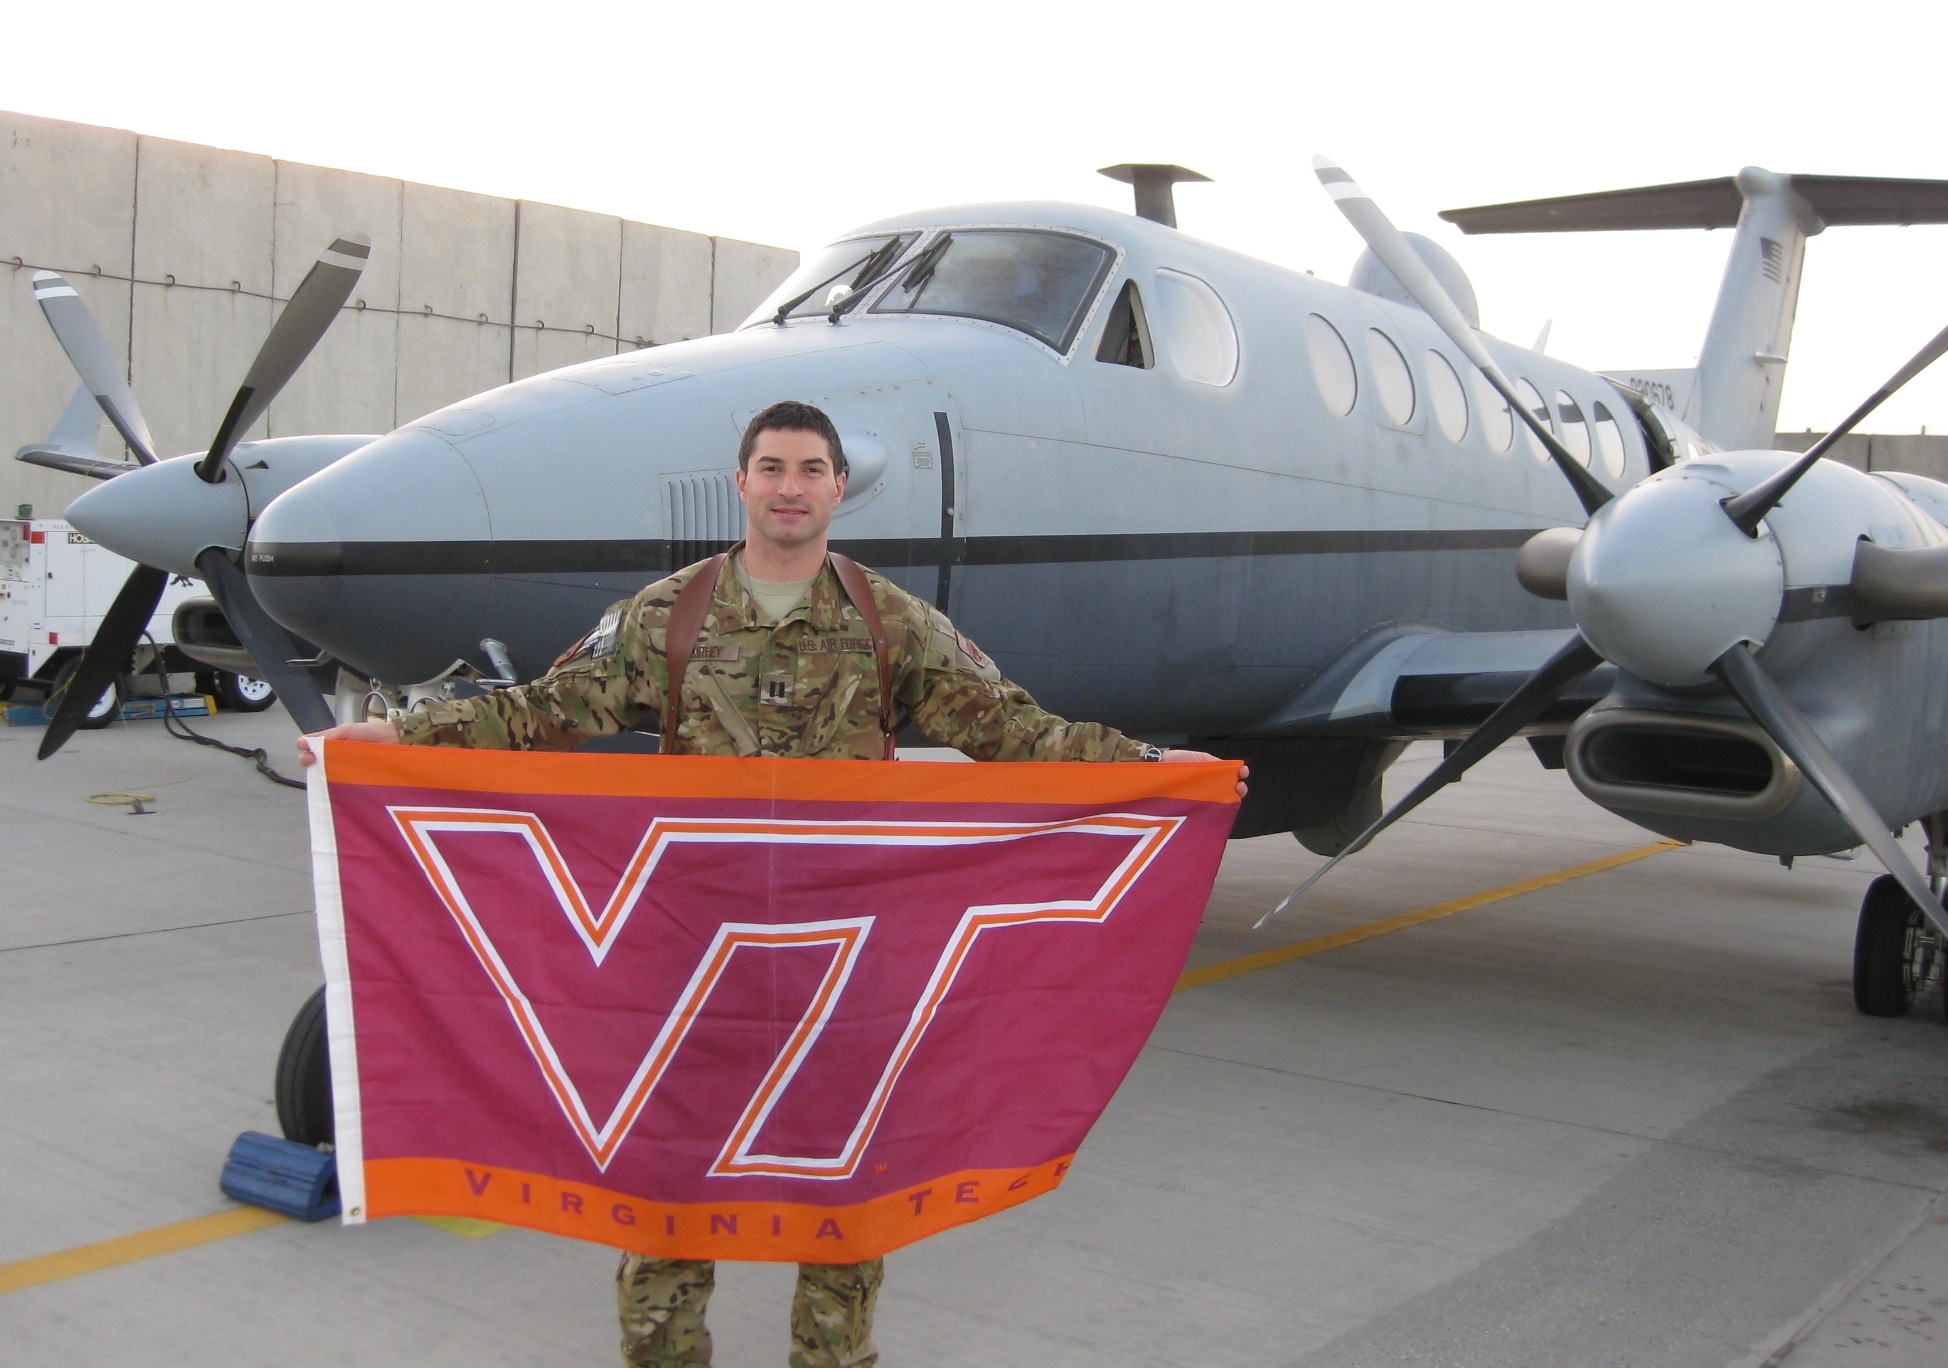 Capt. Andrew Smithey, U.S. Air Force, Virginia Tech Corps of Cadets Class of 2007 in front of his aircraft